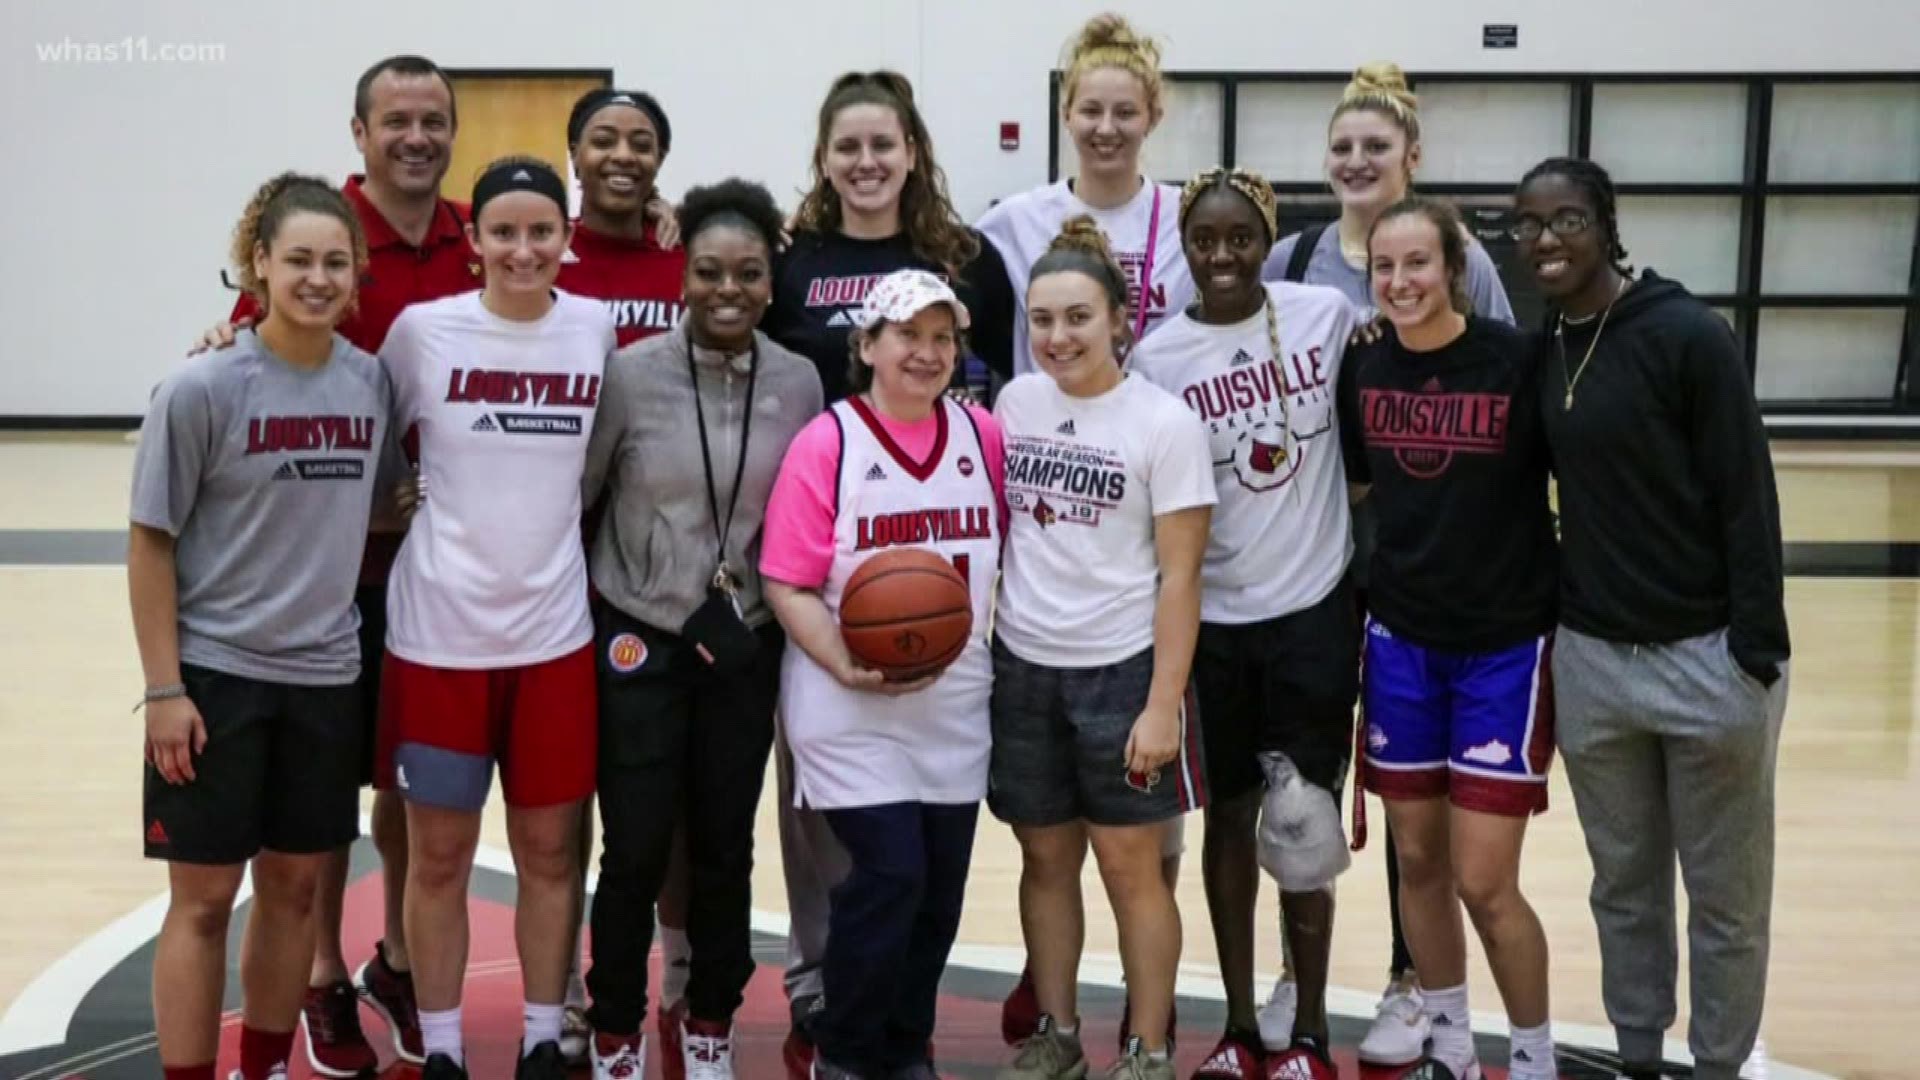 At 62, her age and an unfair foul from life made her goal of playing with the Louisville women's basketball team look grim, but Mary White persisted.